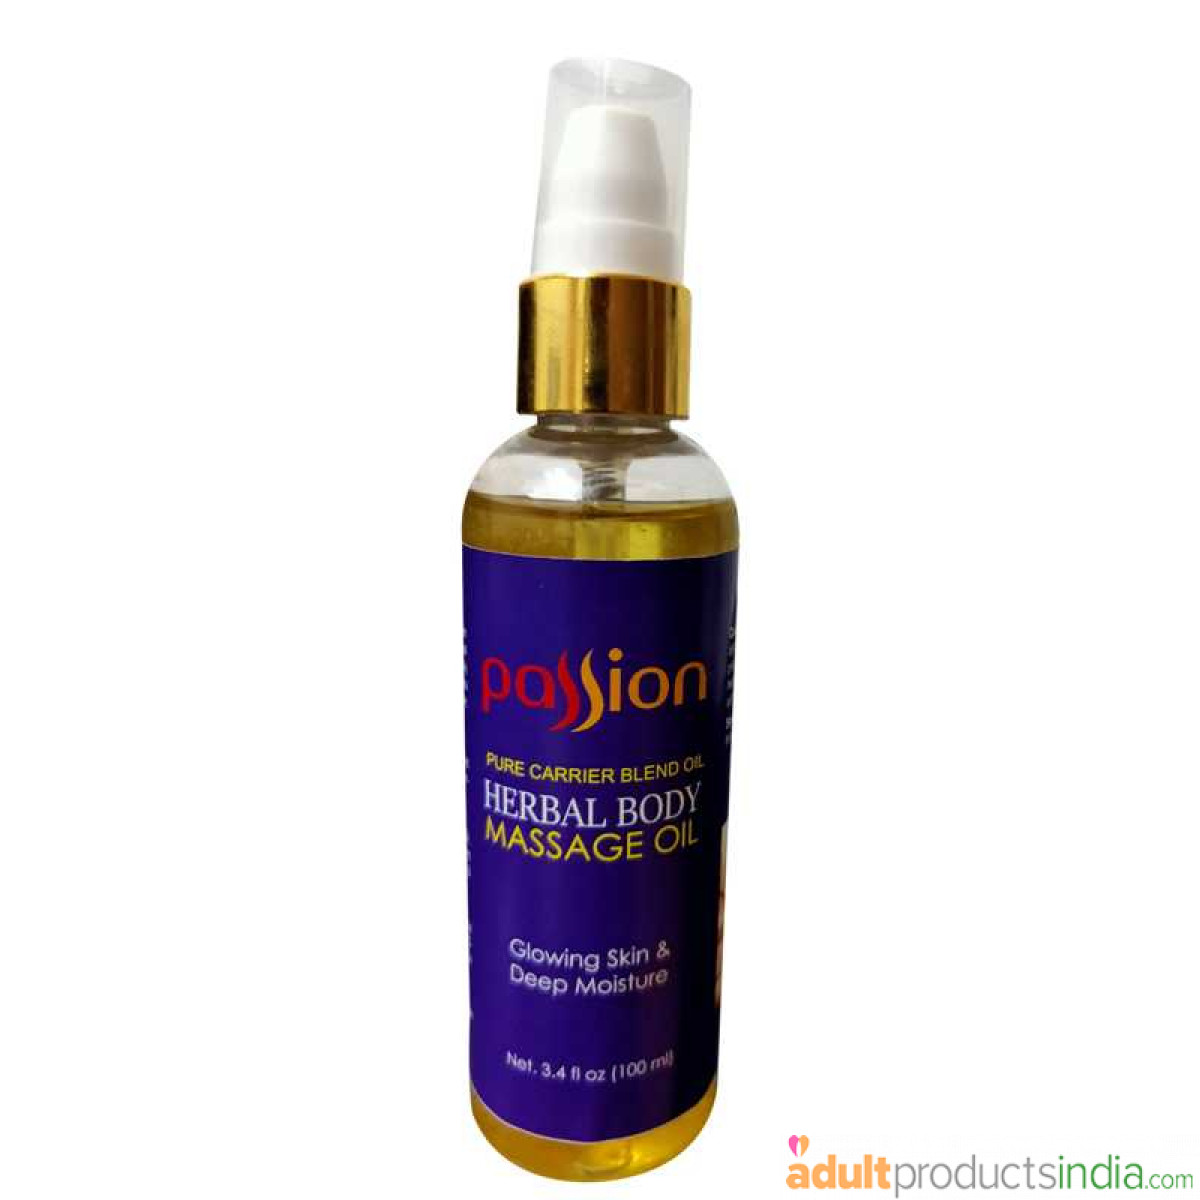 Passion - Herbal Body Massage Oil - Glowing skin